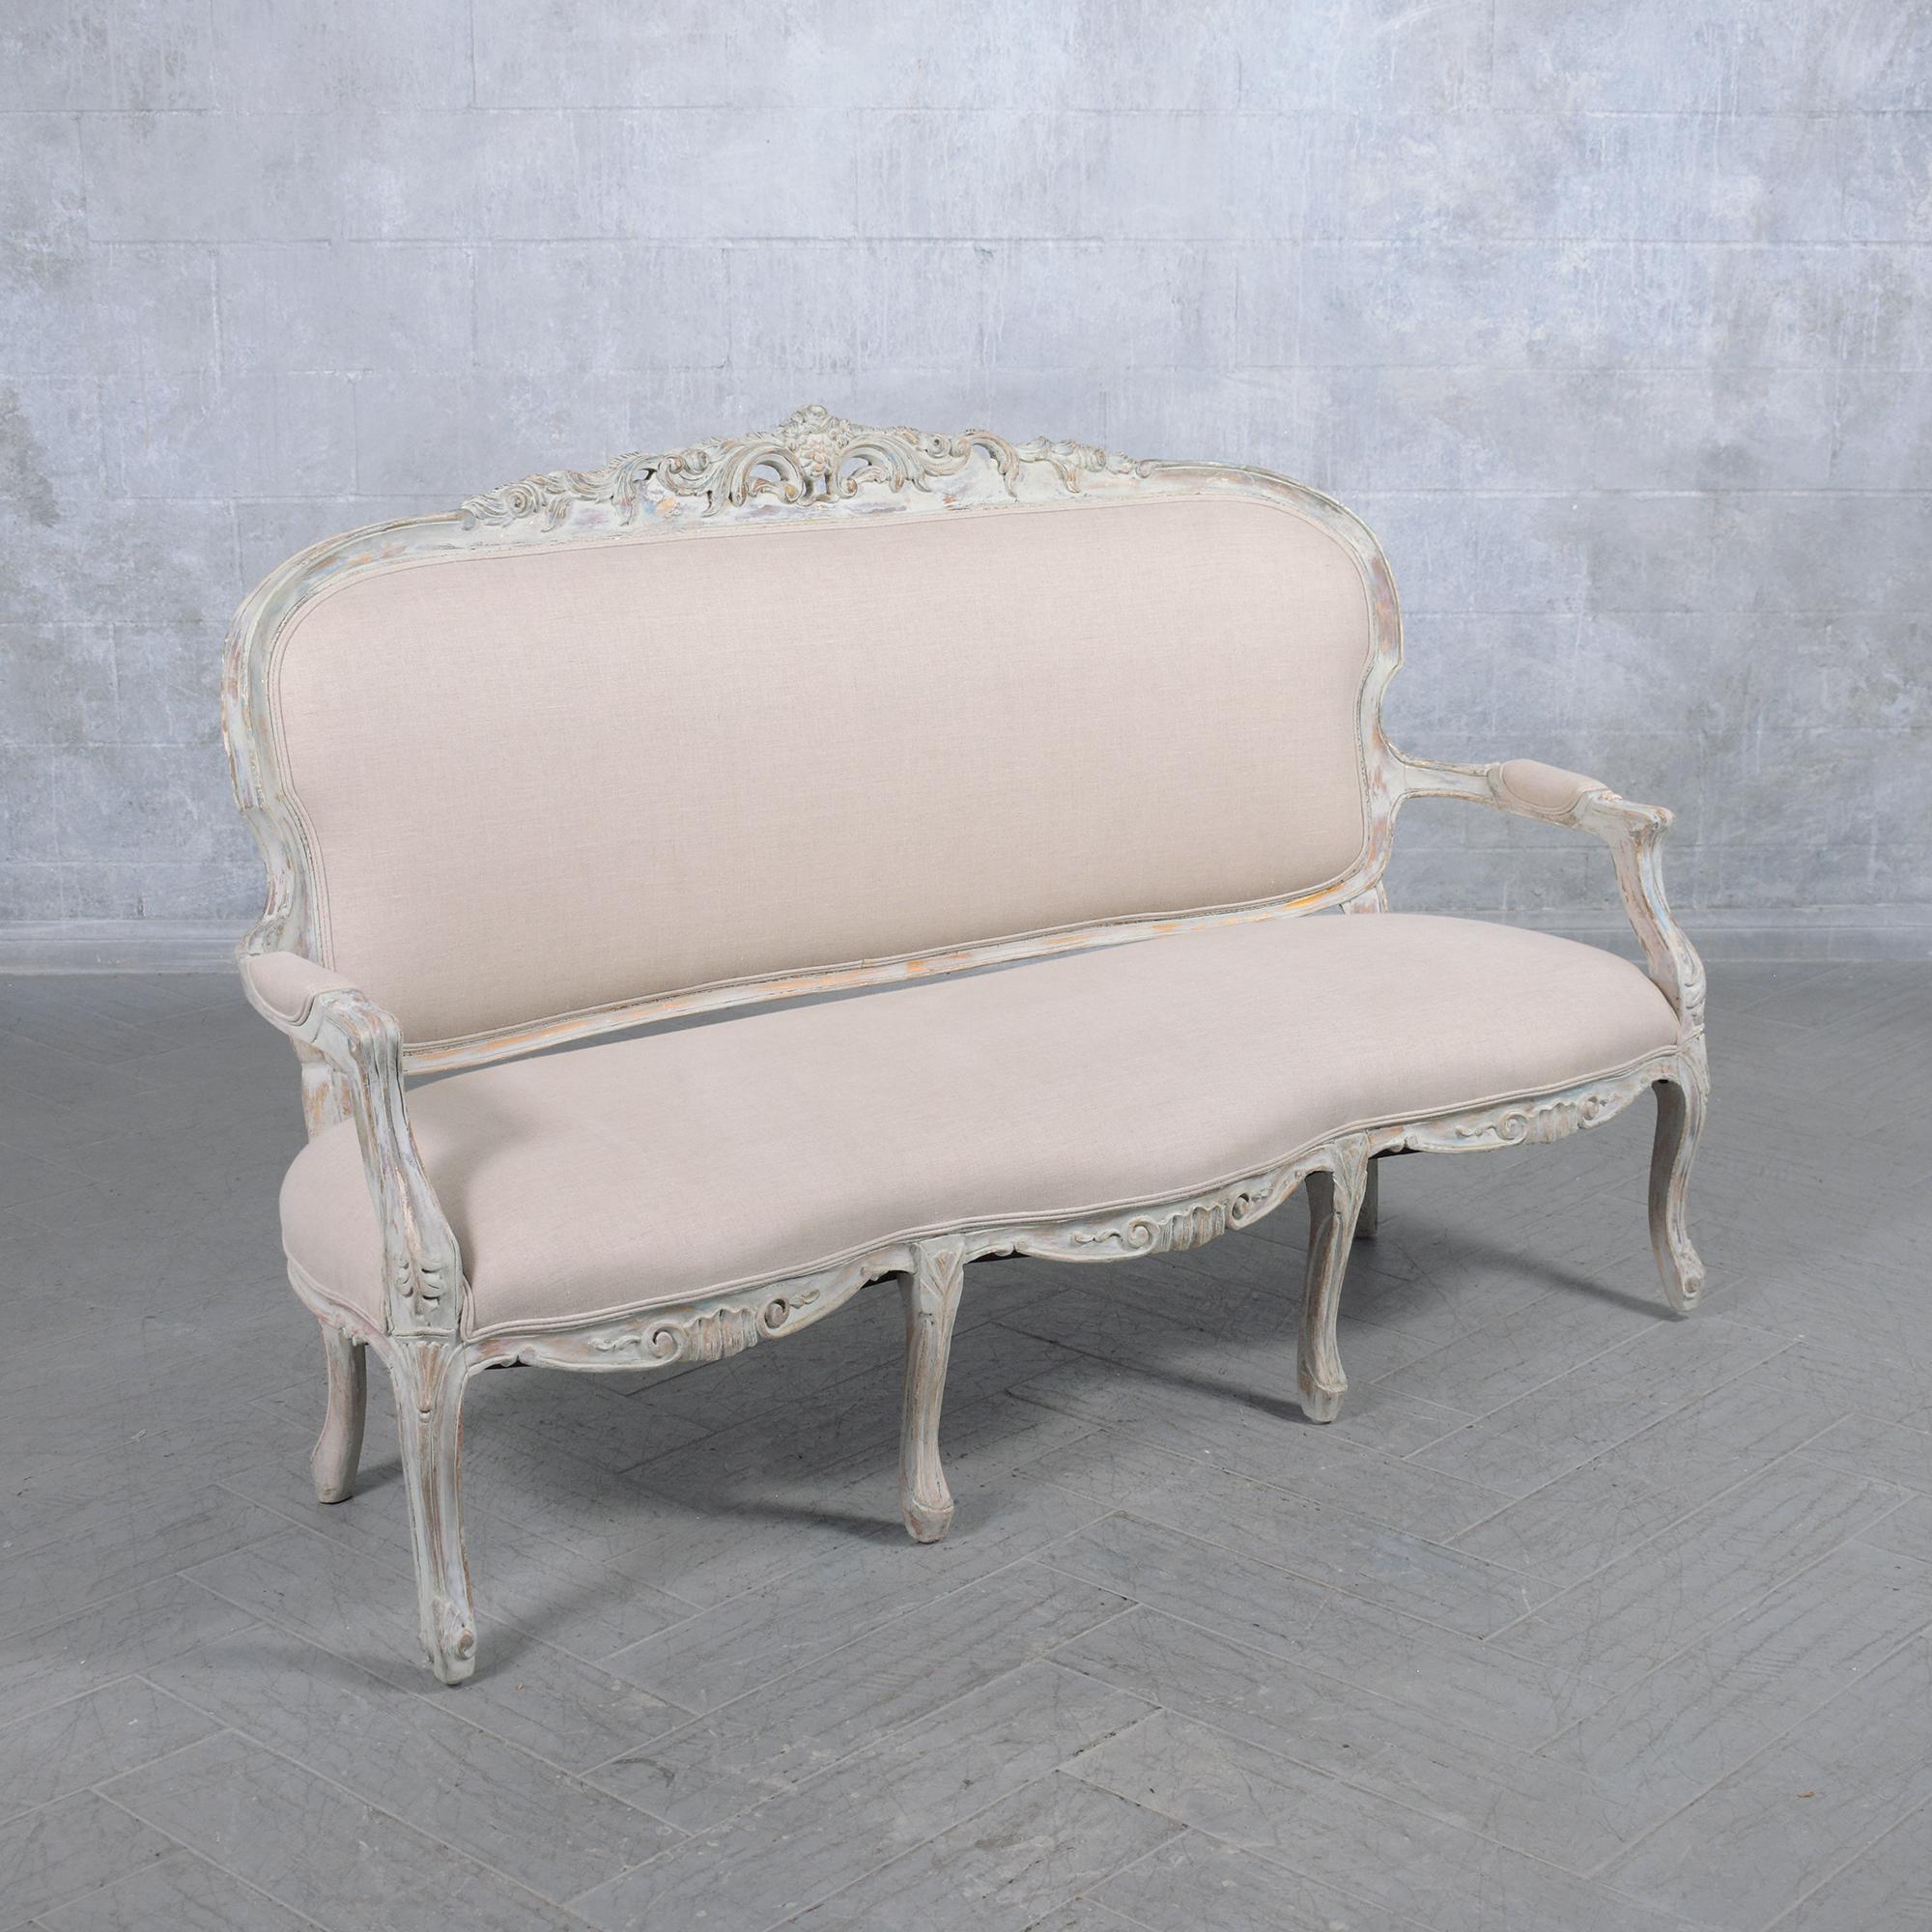 Restored Early 1900s French Sofa with Hand-Carved Details and Belgian Fabric For Sale 2